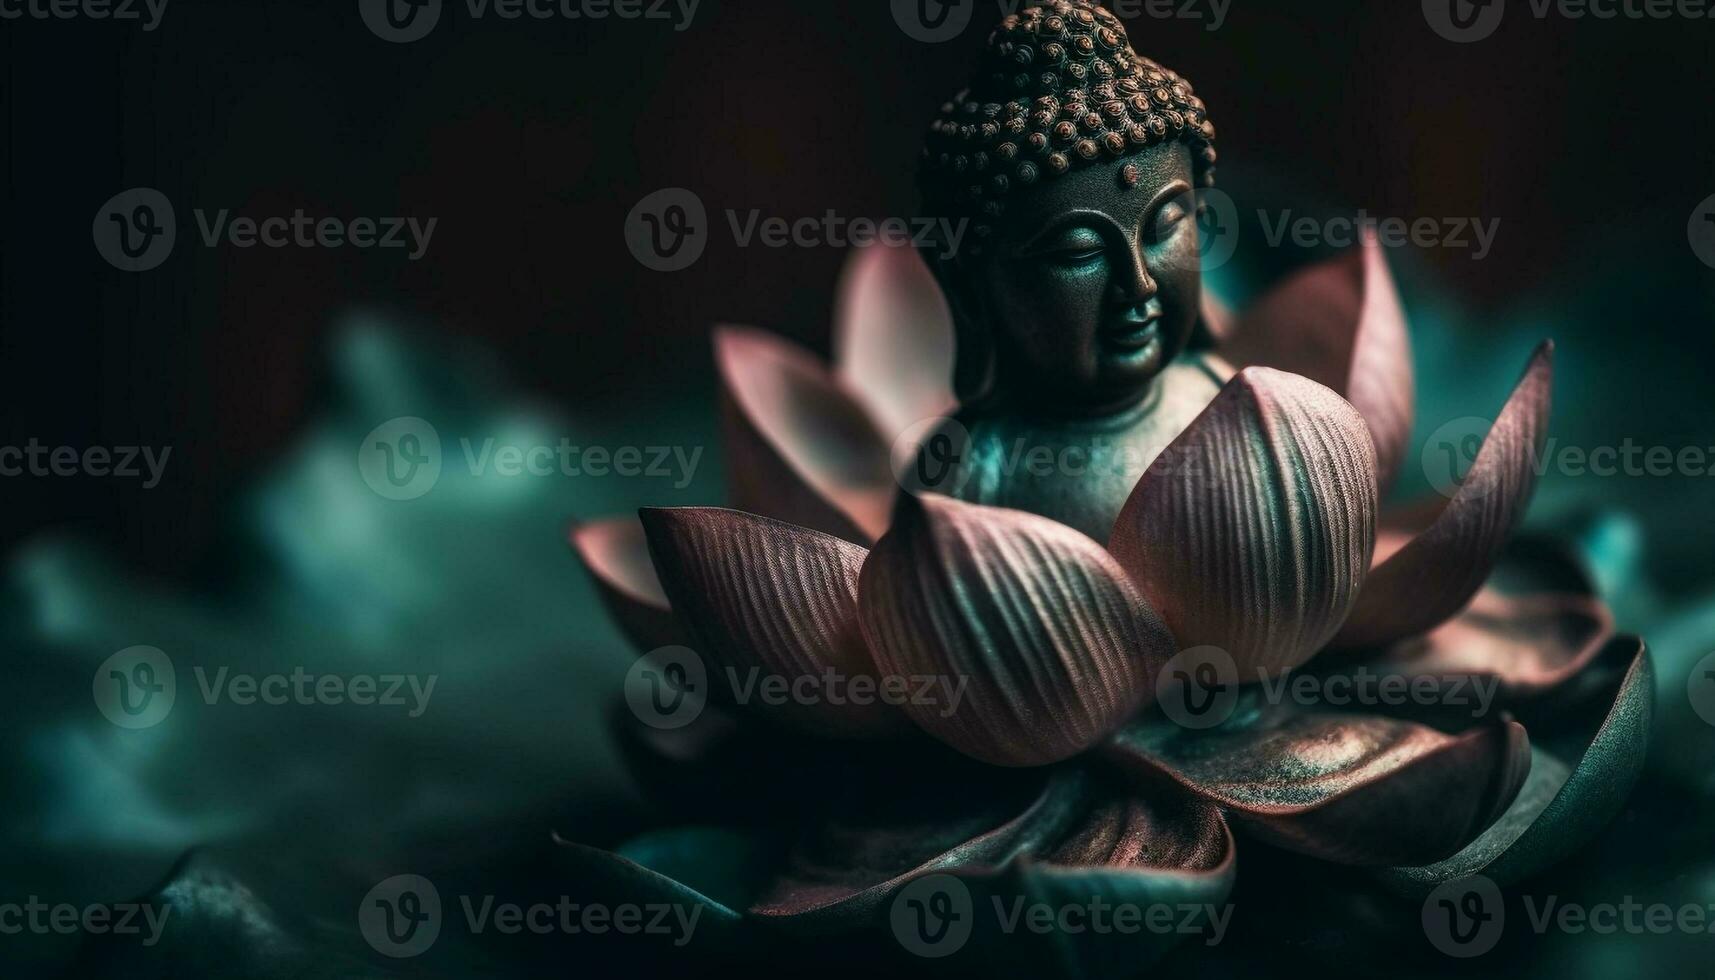 Lotus position meditating, harmony with nature, symbol of spirituality generated by AI photo